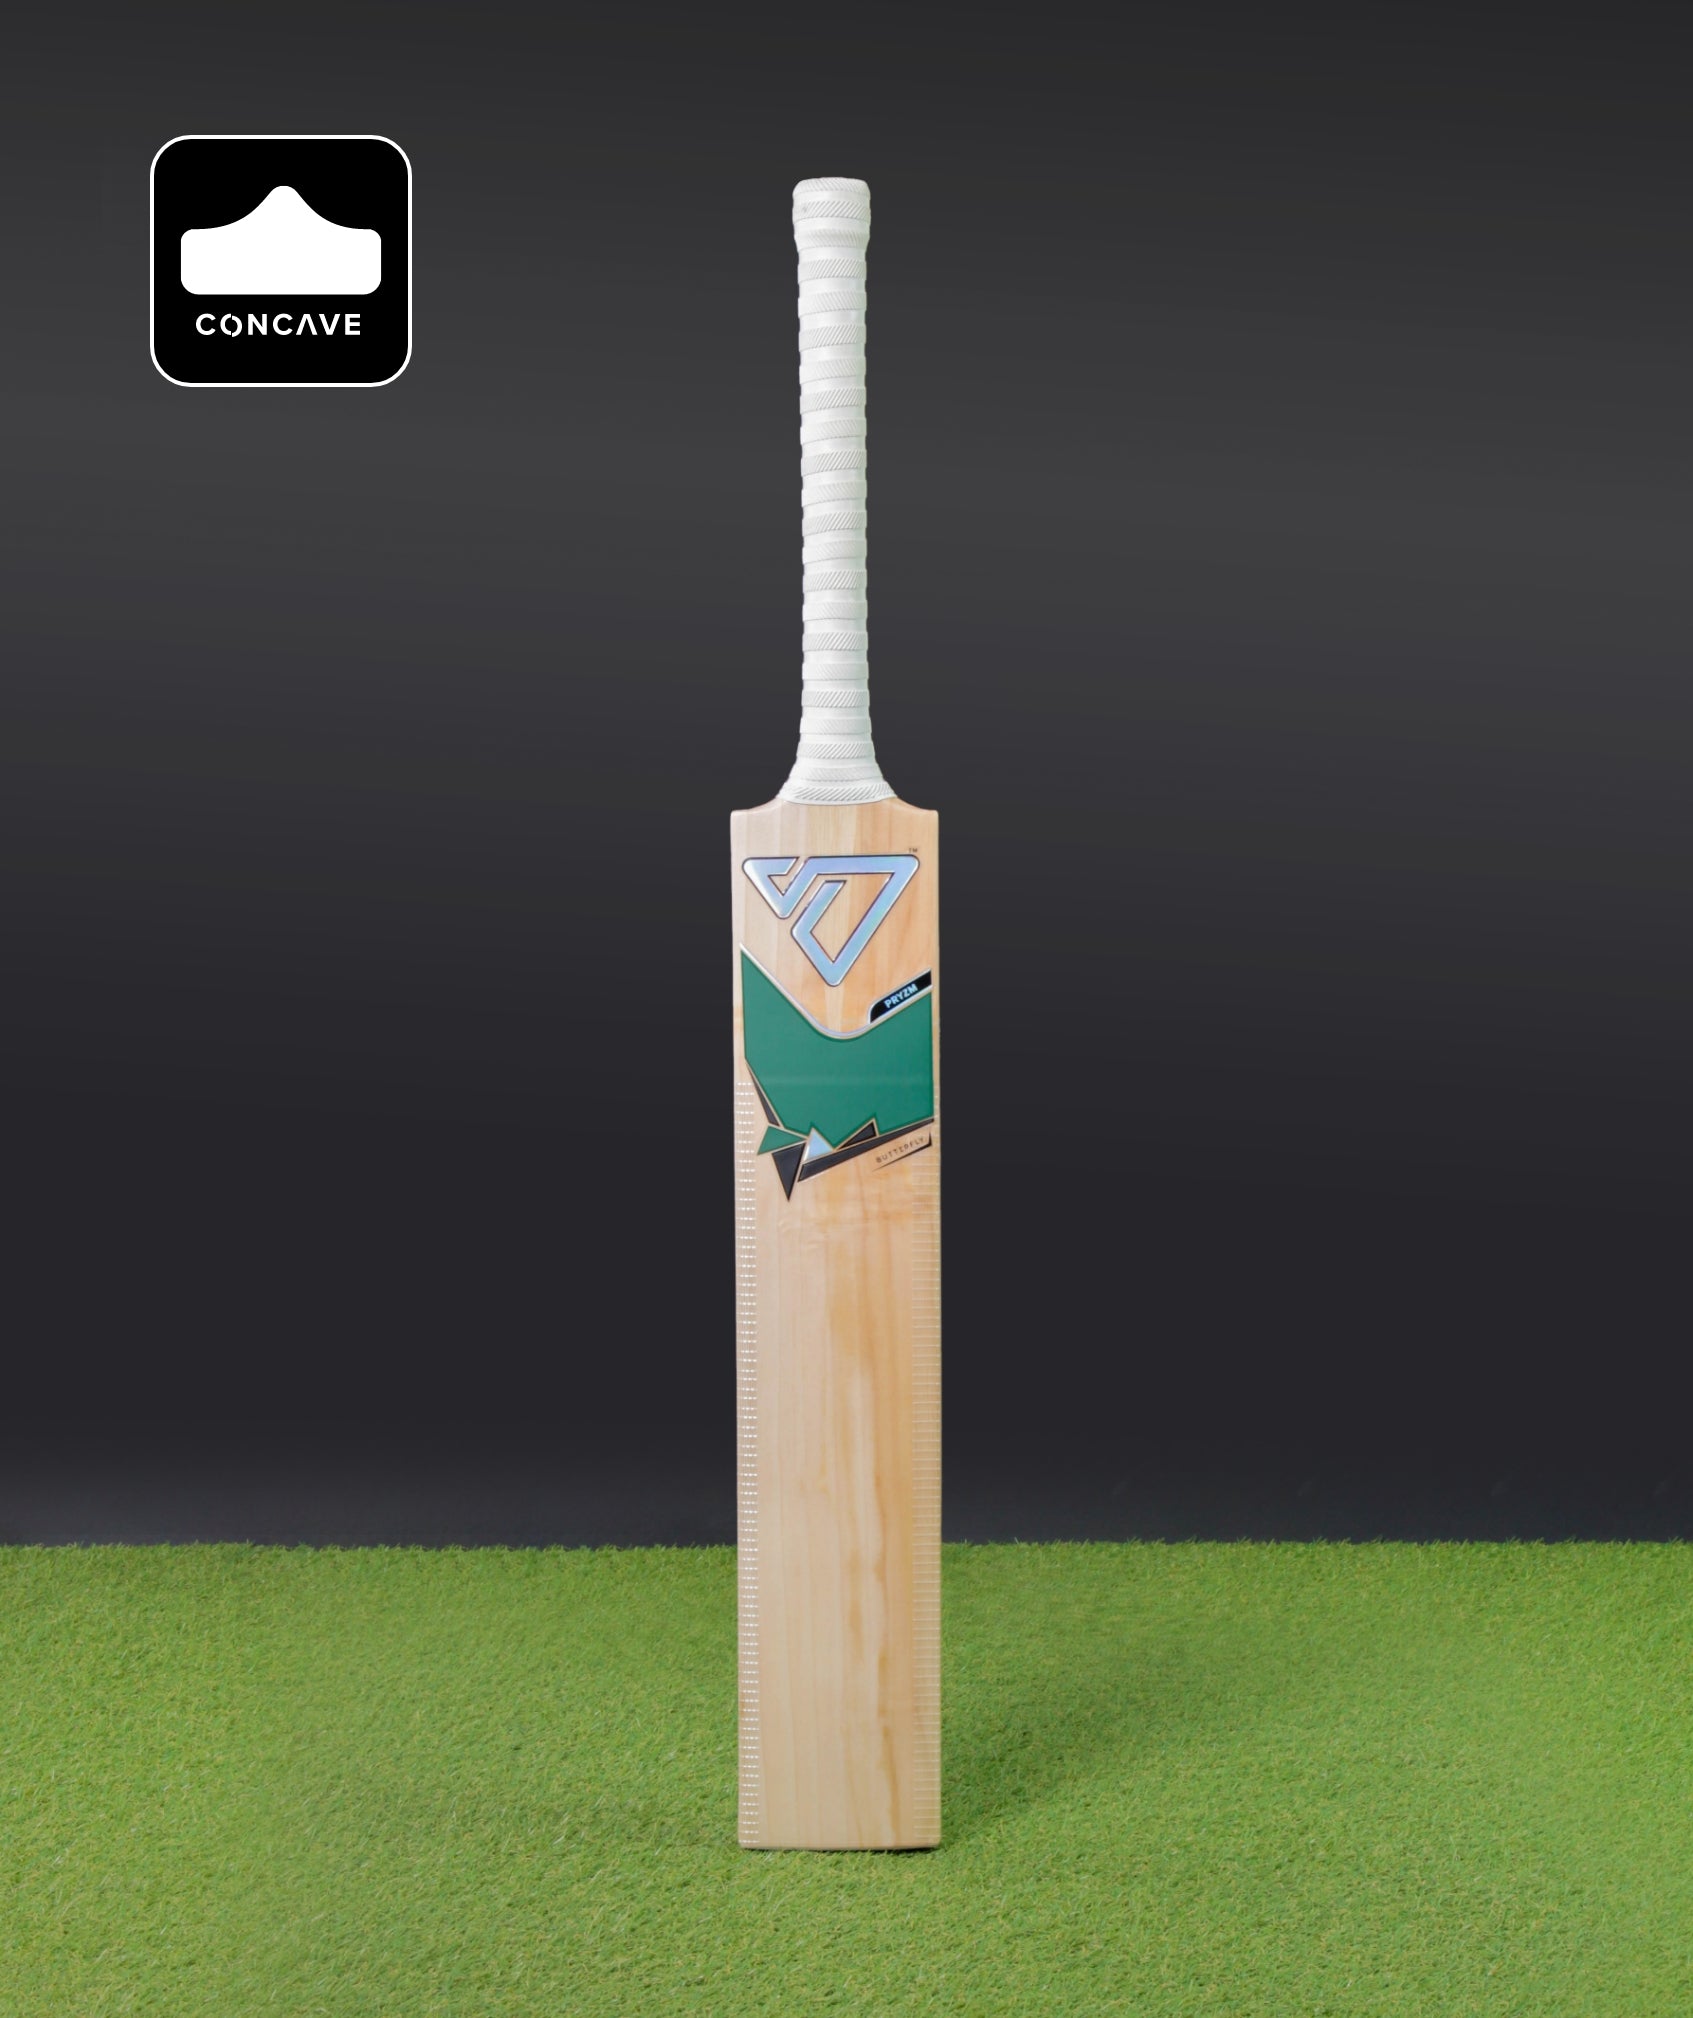 2'9 Concave | Butterfly Cricket Bat #3301